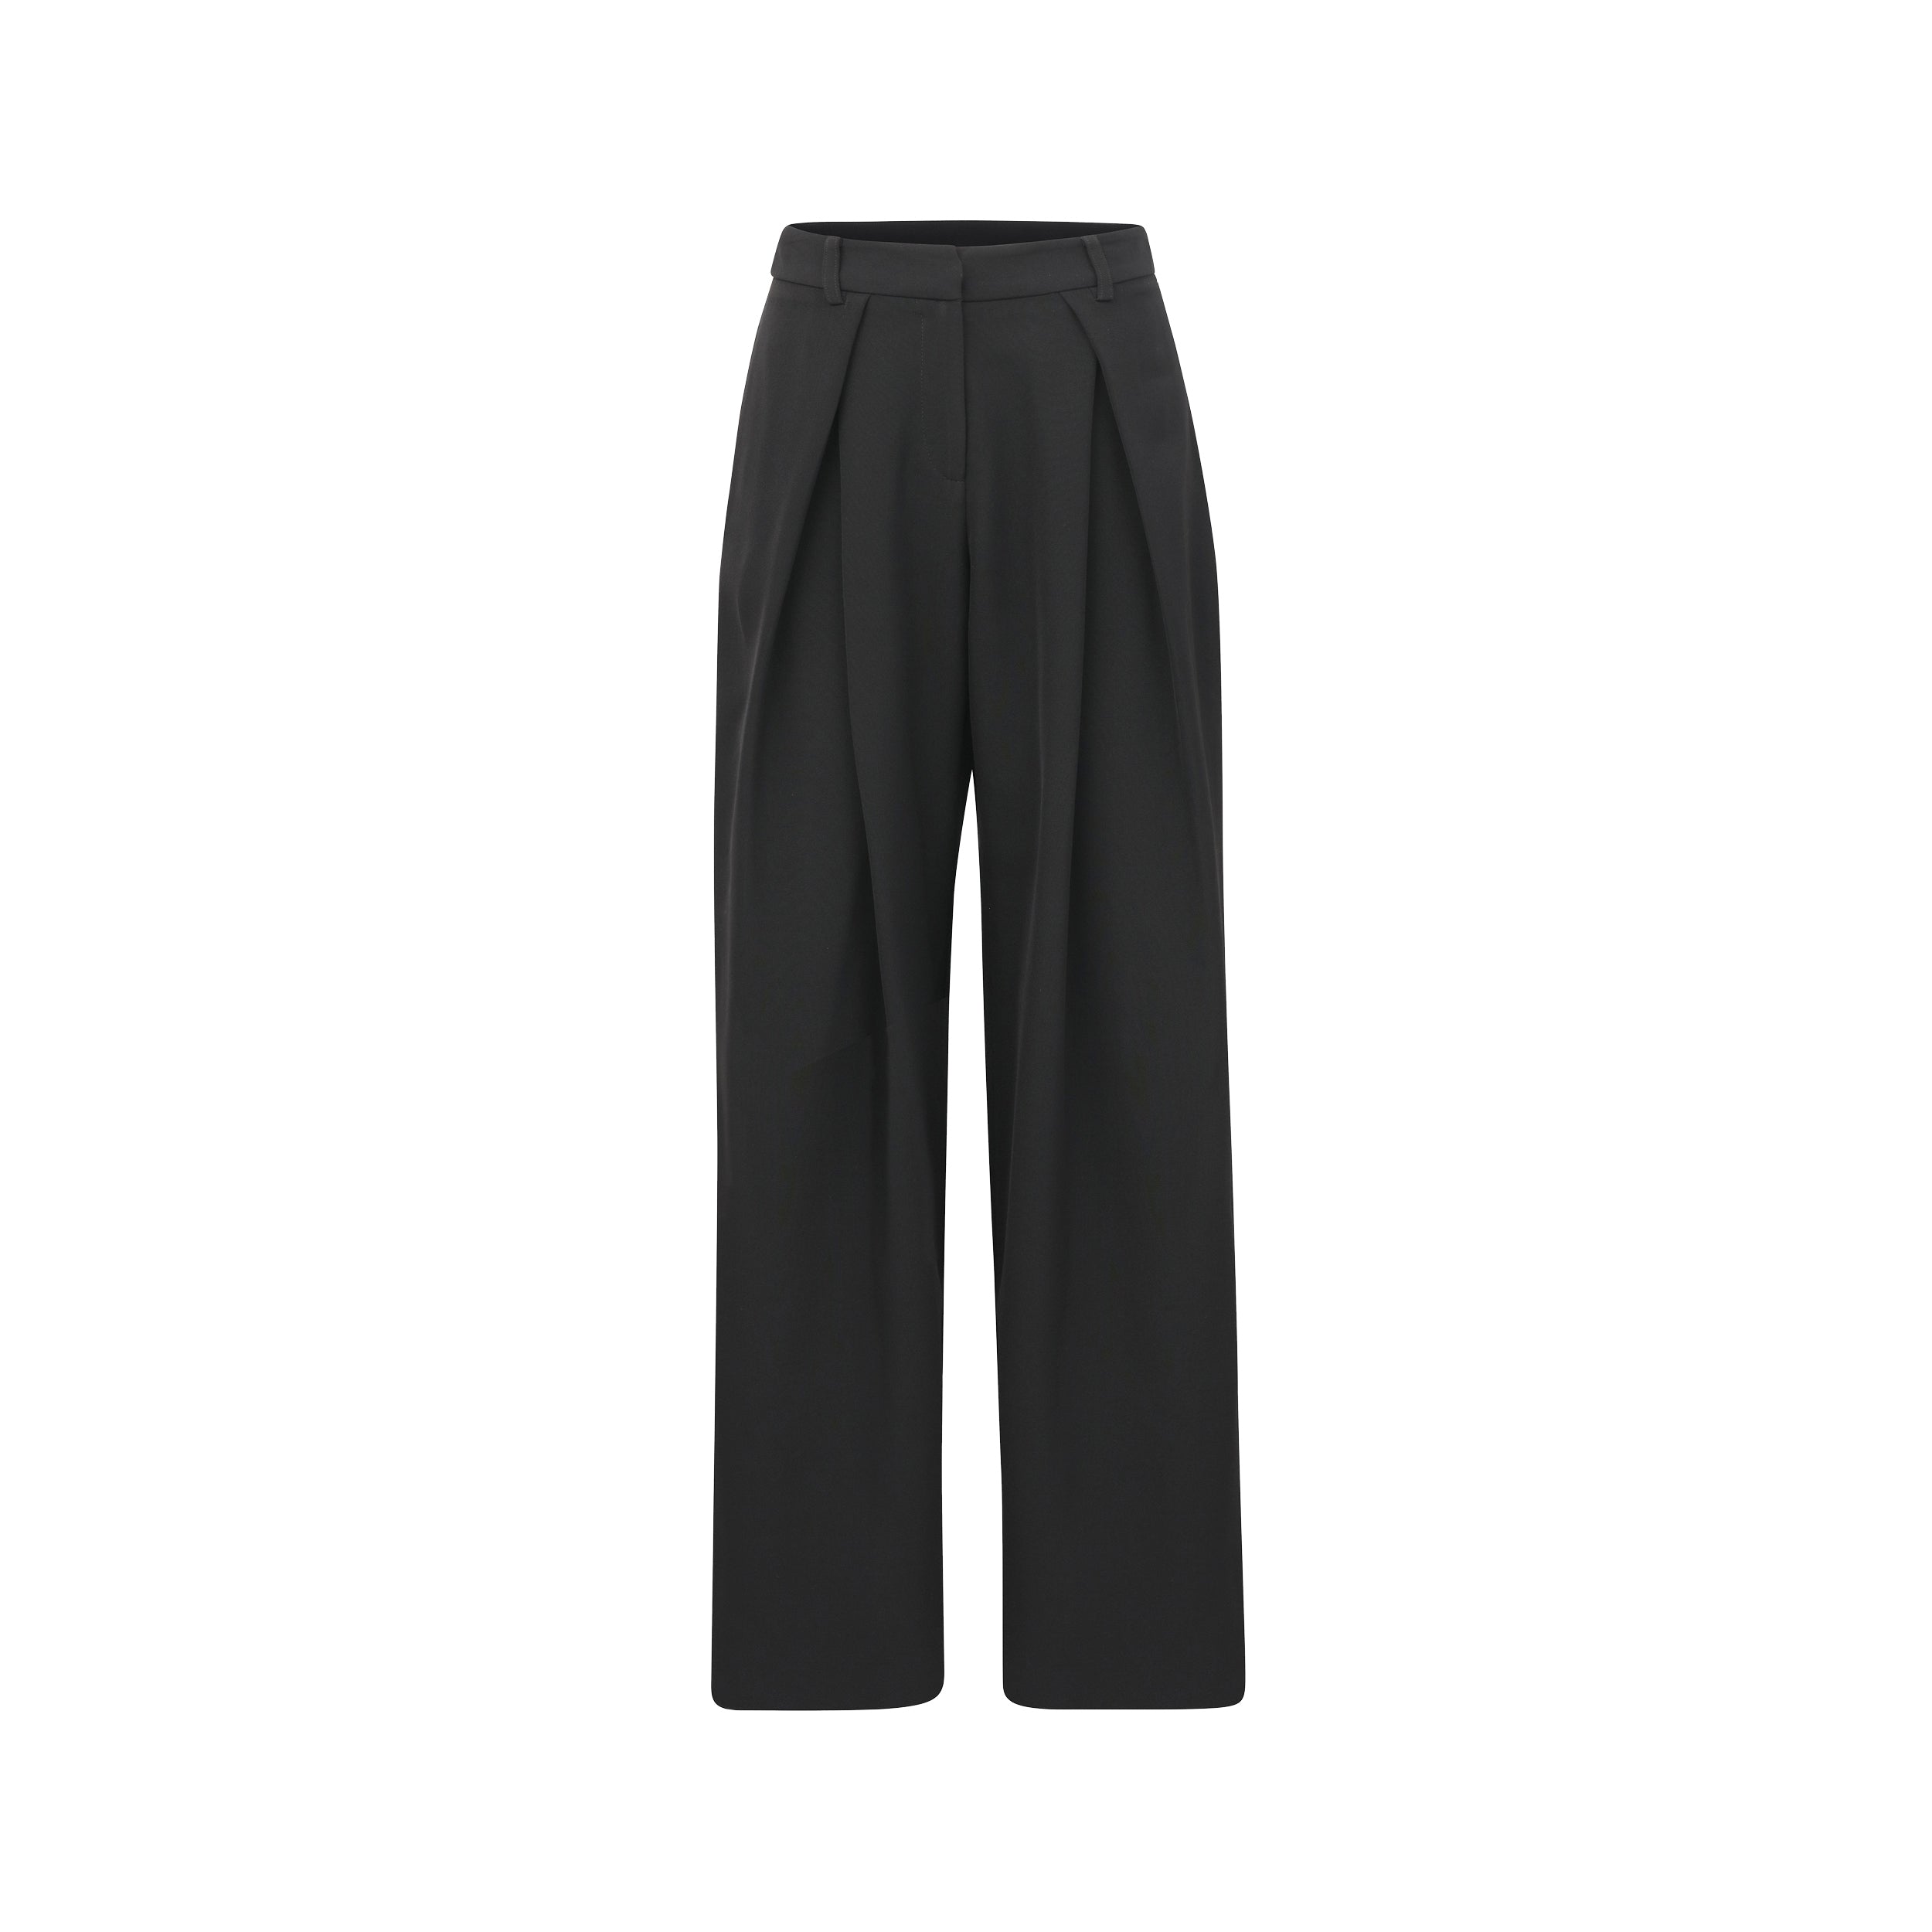 Front view of pleated black trousers with stretch fabric